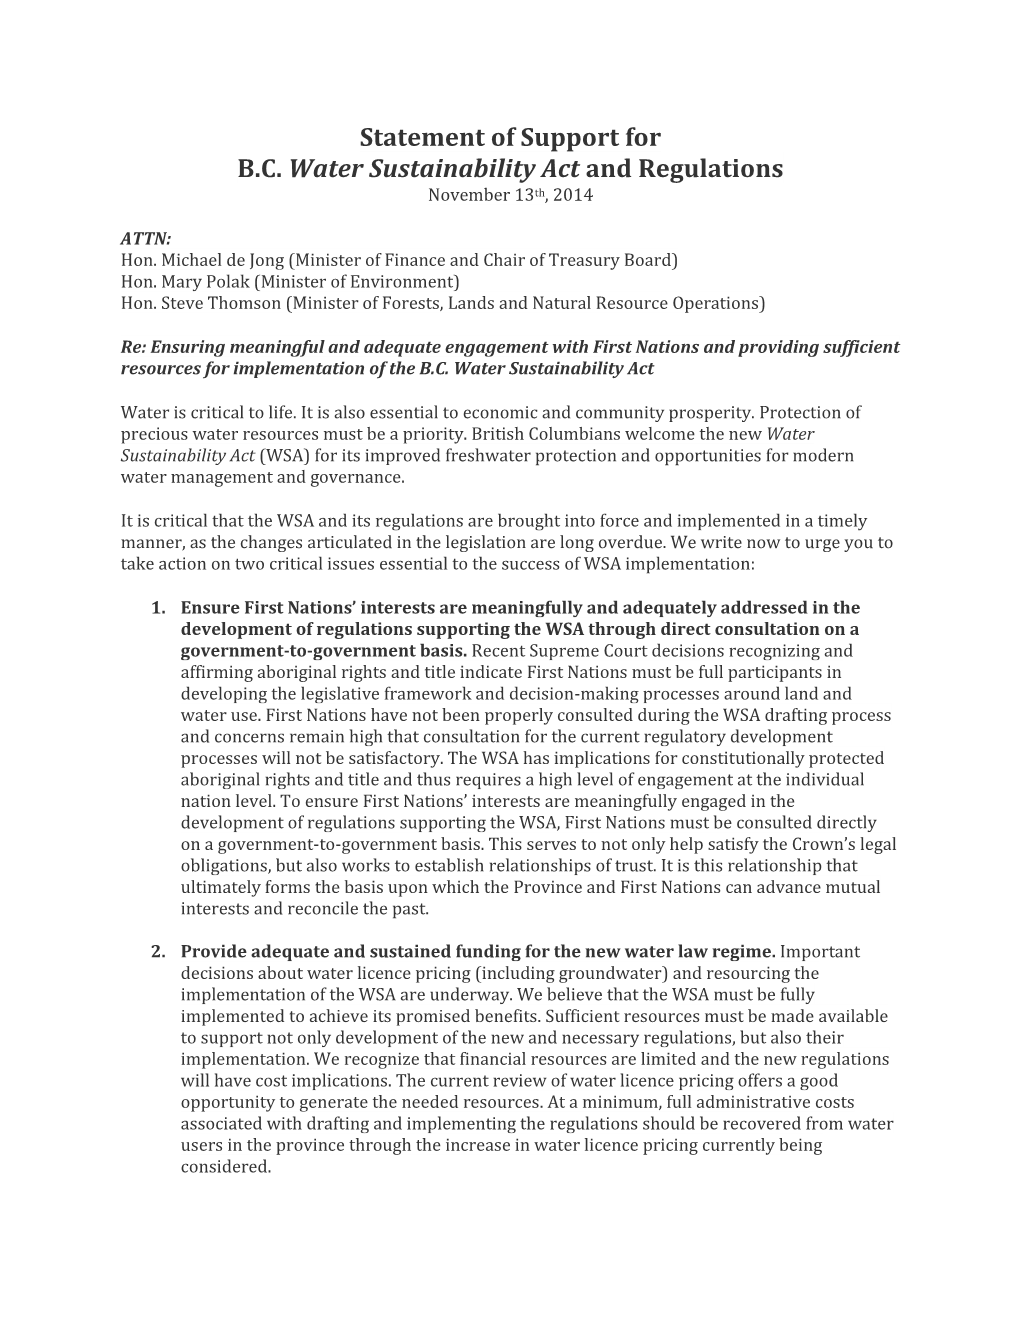 Statement of Support for B.C. Water Sustainability Act and Regulations November 13Th, 2014